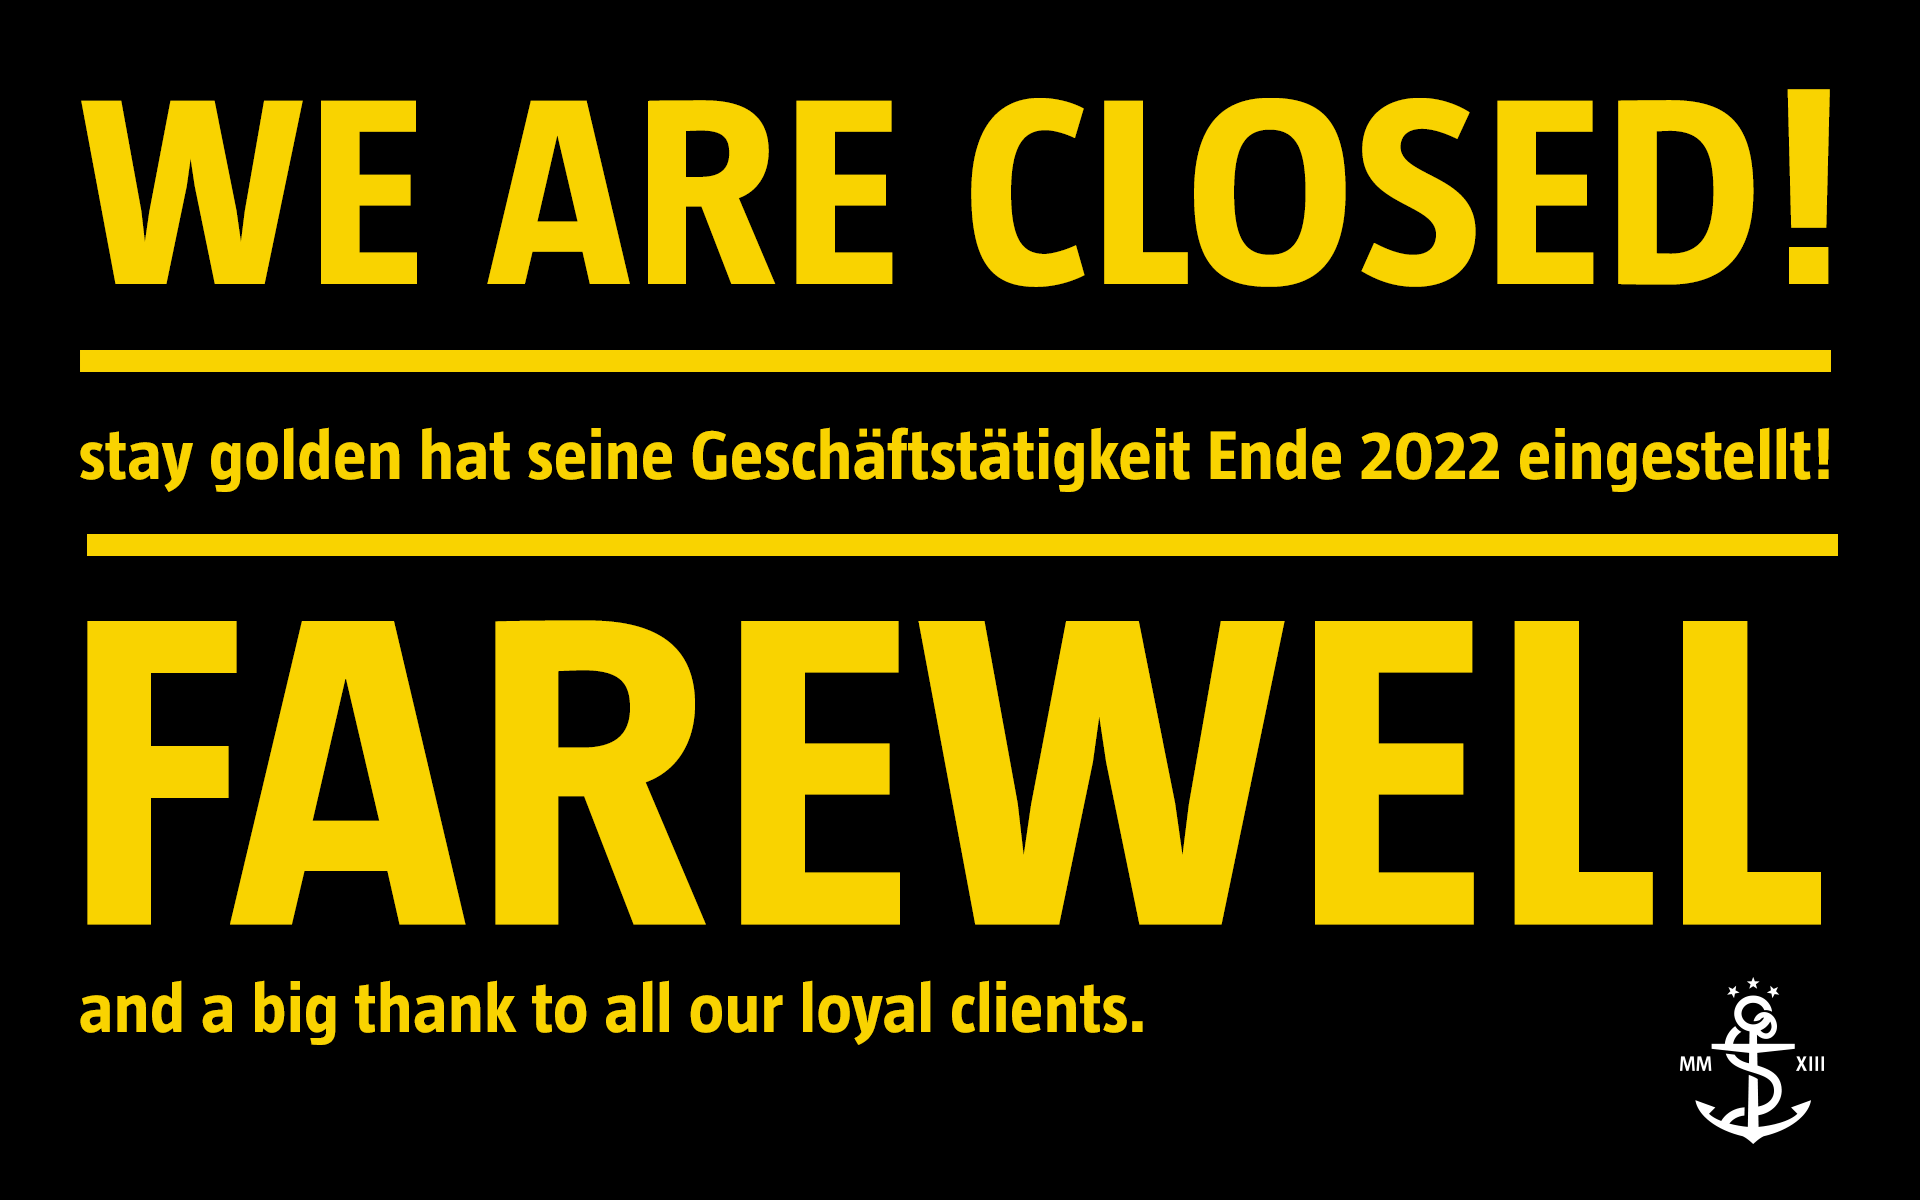 staygolden-We_are_closed-Farewell-1920x1200